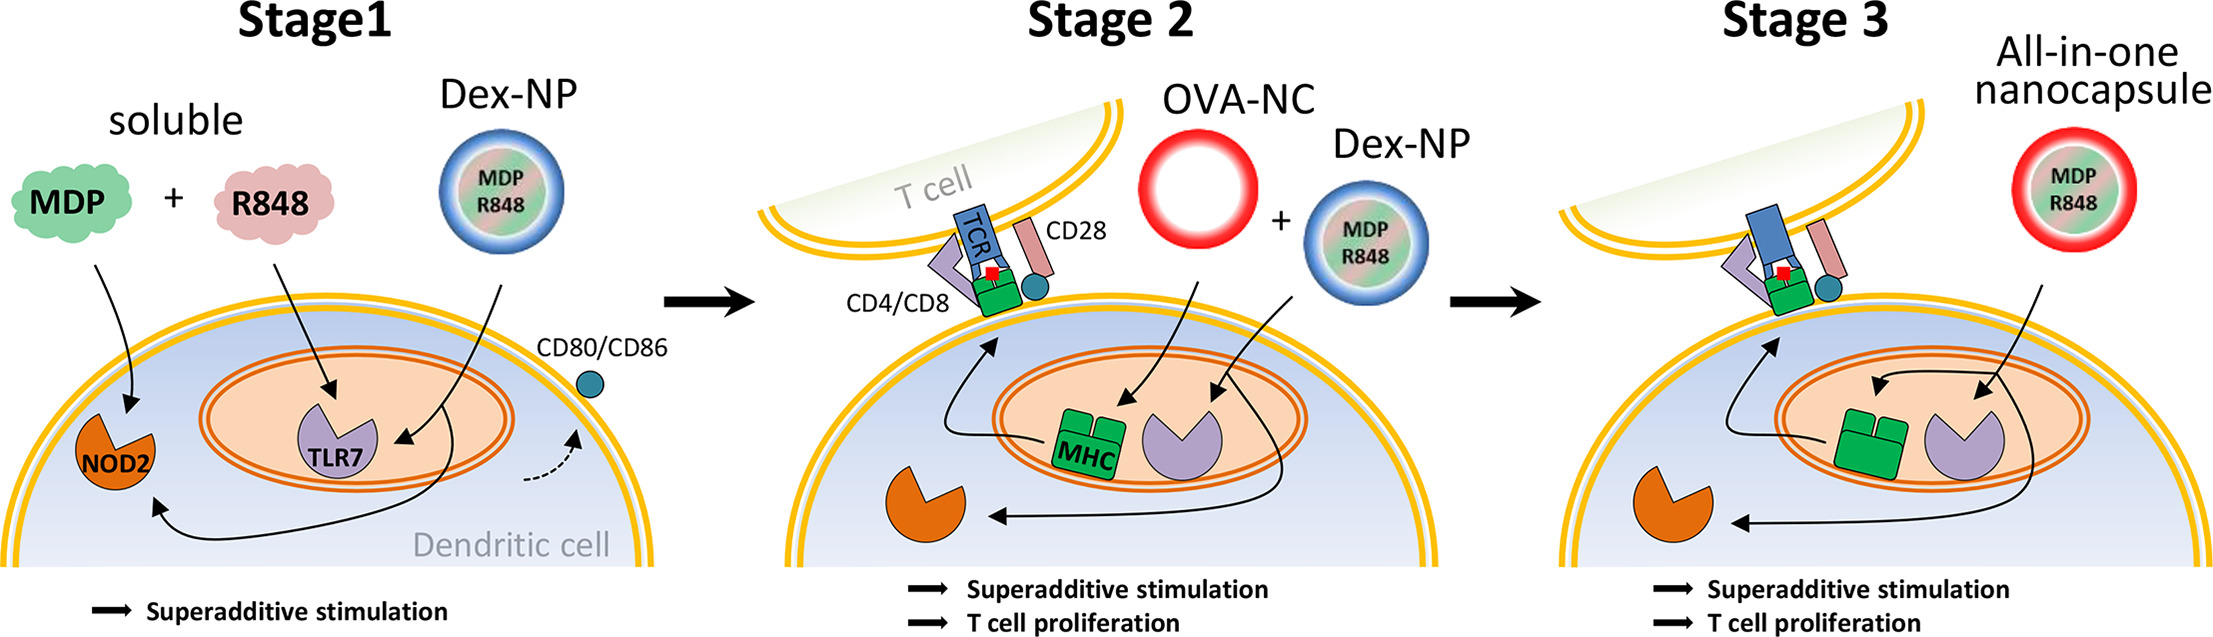 Delivering all in one: Antigen-nanocapsule loaded with dual adjuvant yields superadditive effects by DC-directed T cell stimulation